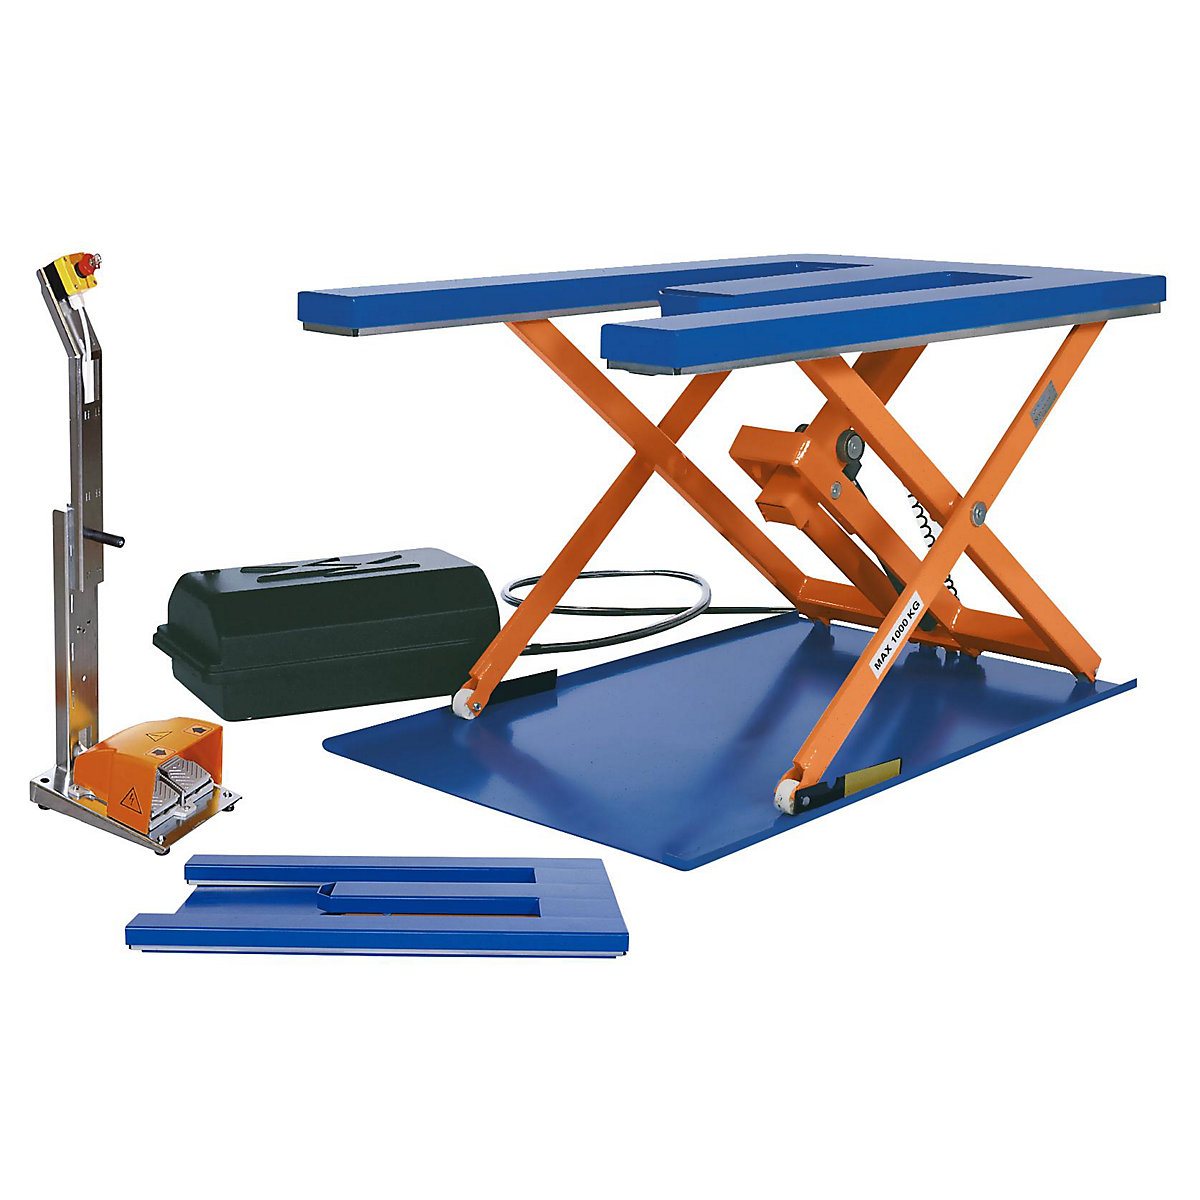 Low profile lift table – Edmolift, LxW 1450 x 900 mm, lifting range up to 800 mm, E-shaped platform, 400 V, with foot operated control unit